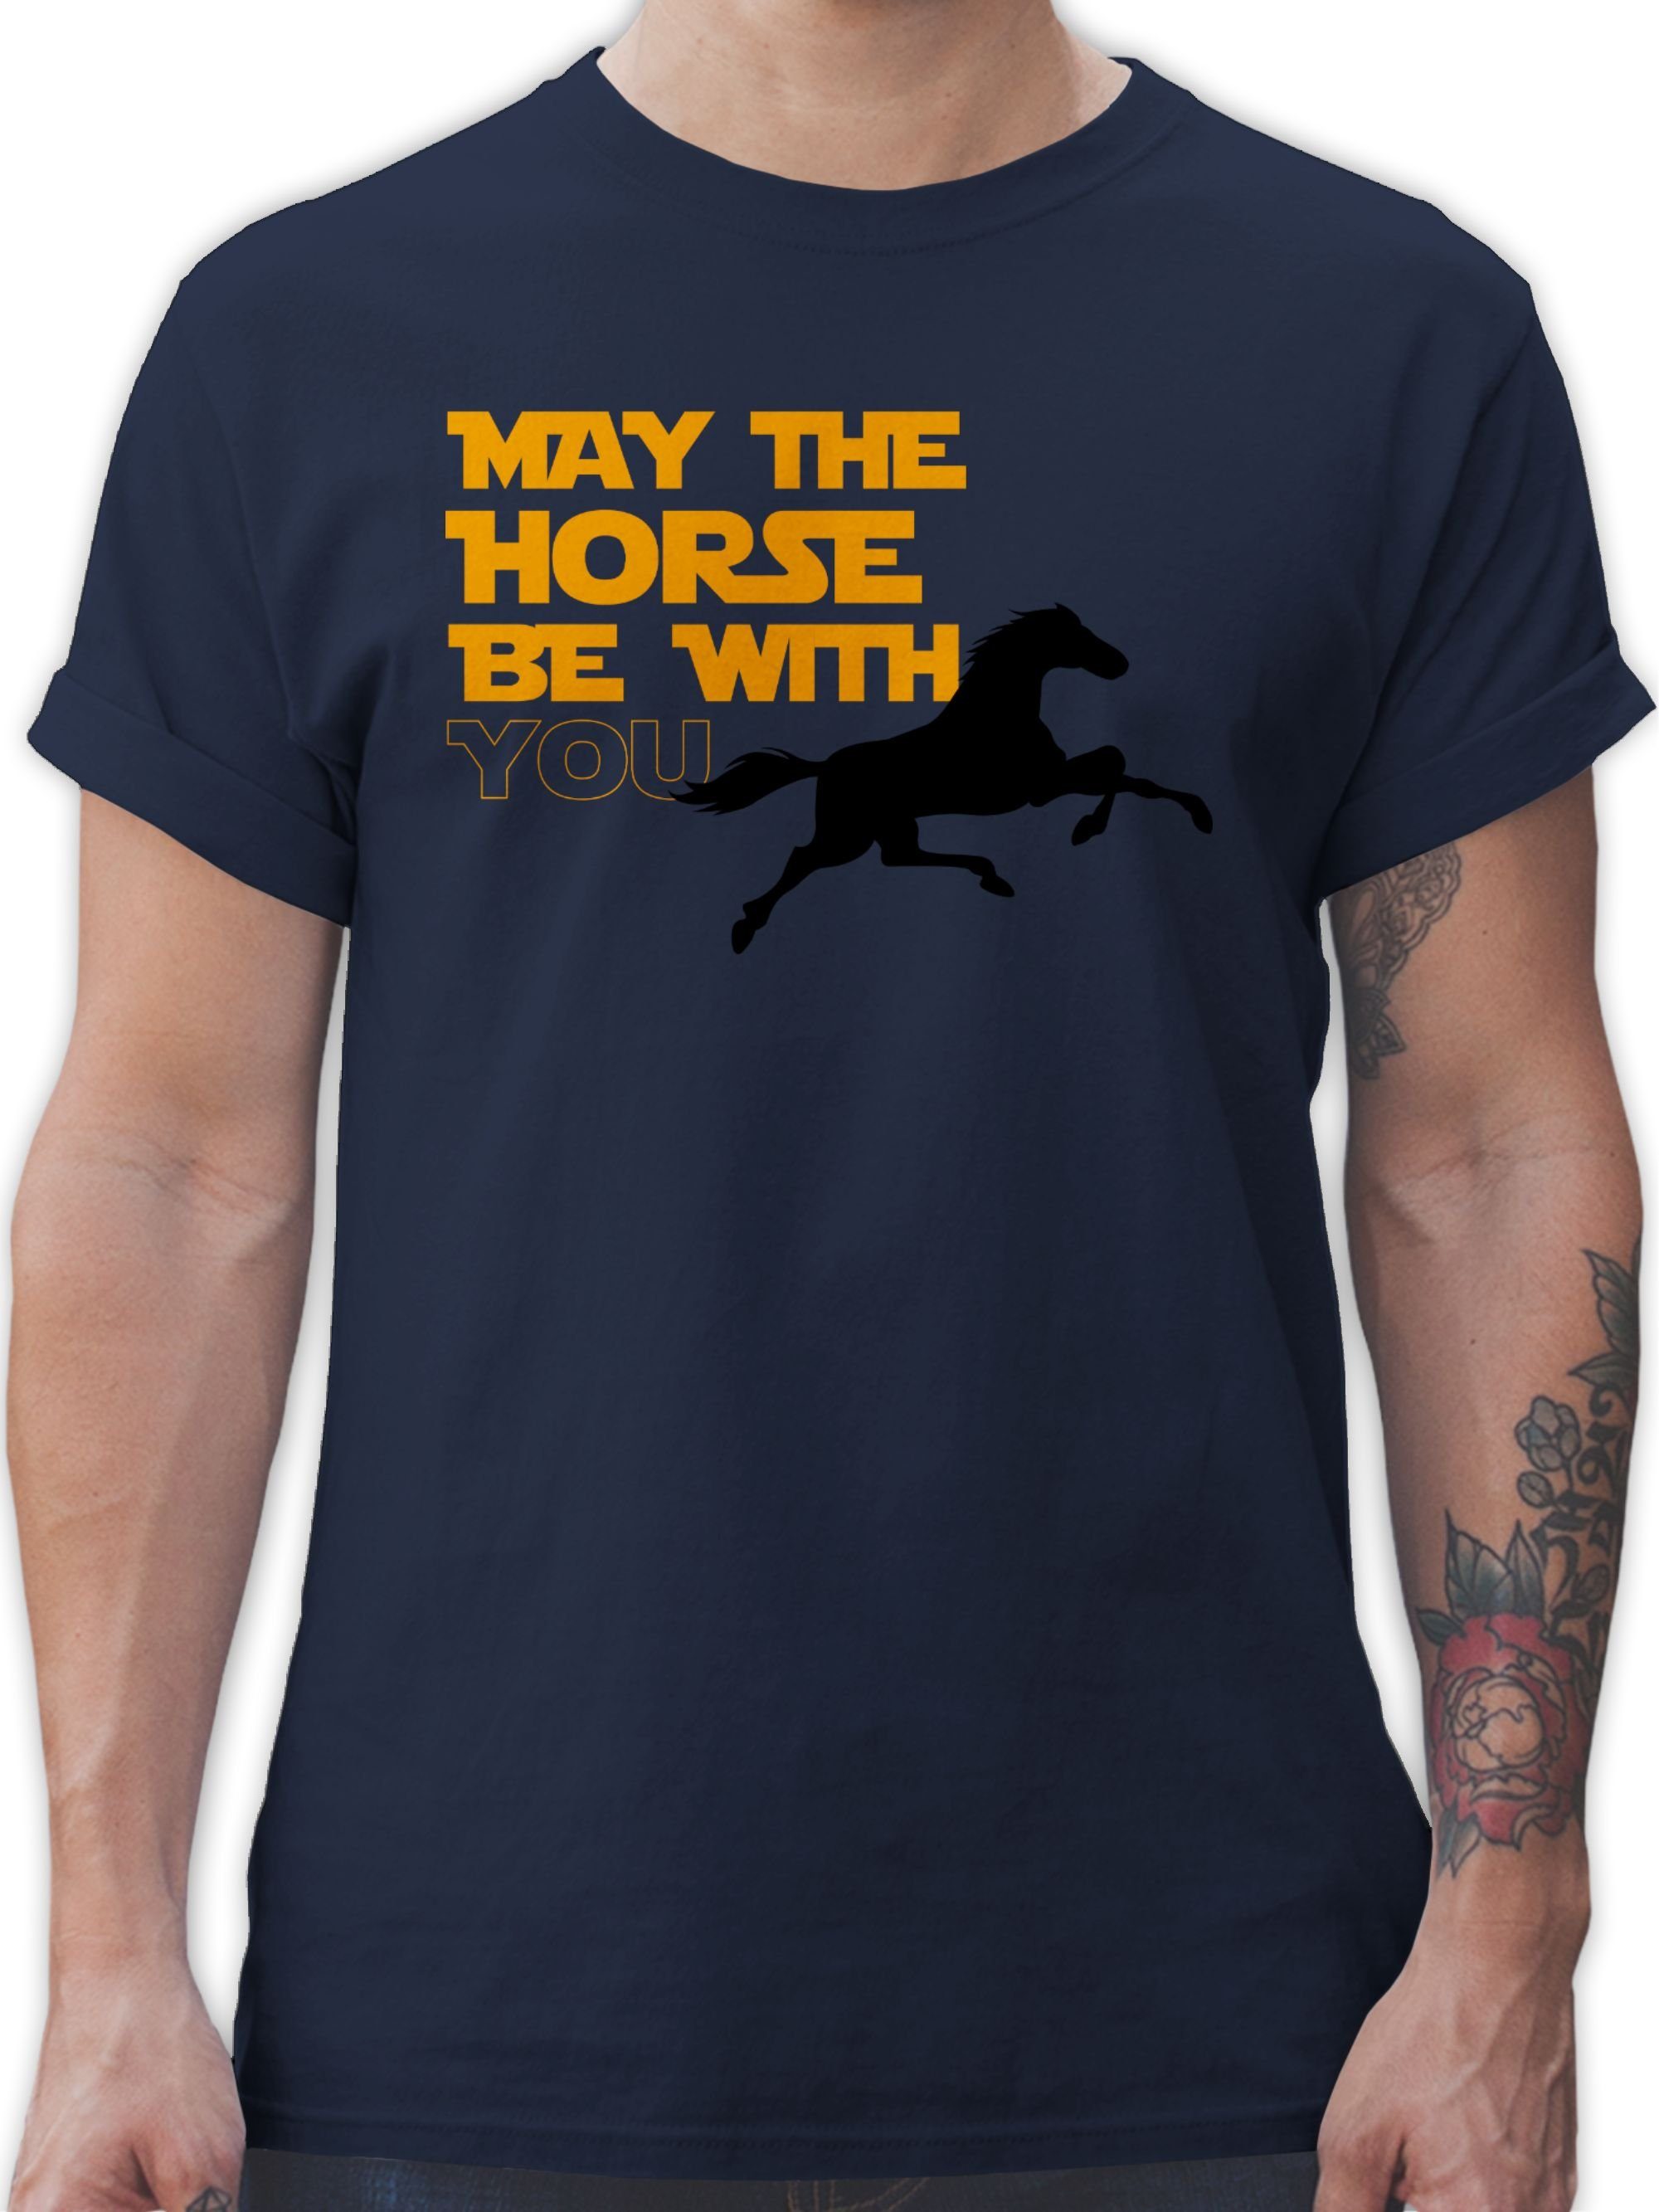 T-Shirt Blau Pferd you 3 Shirtracer be horse Navy with May the